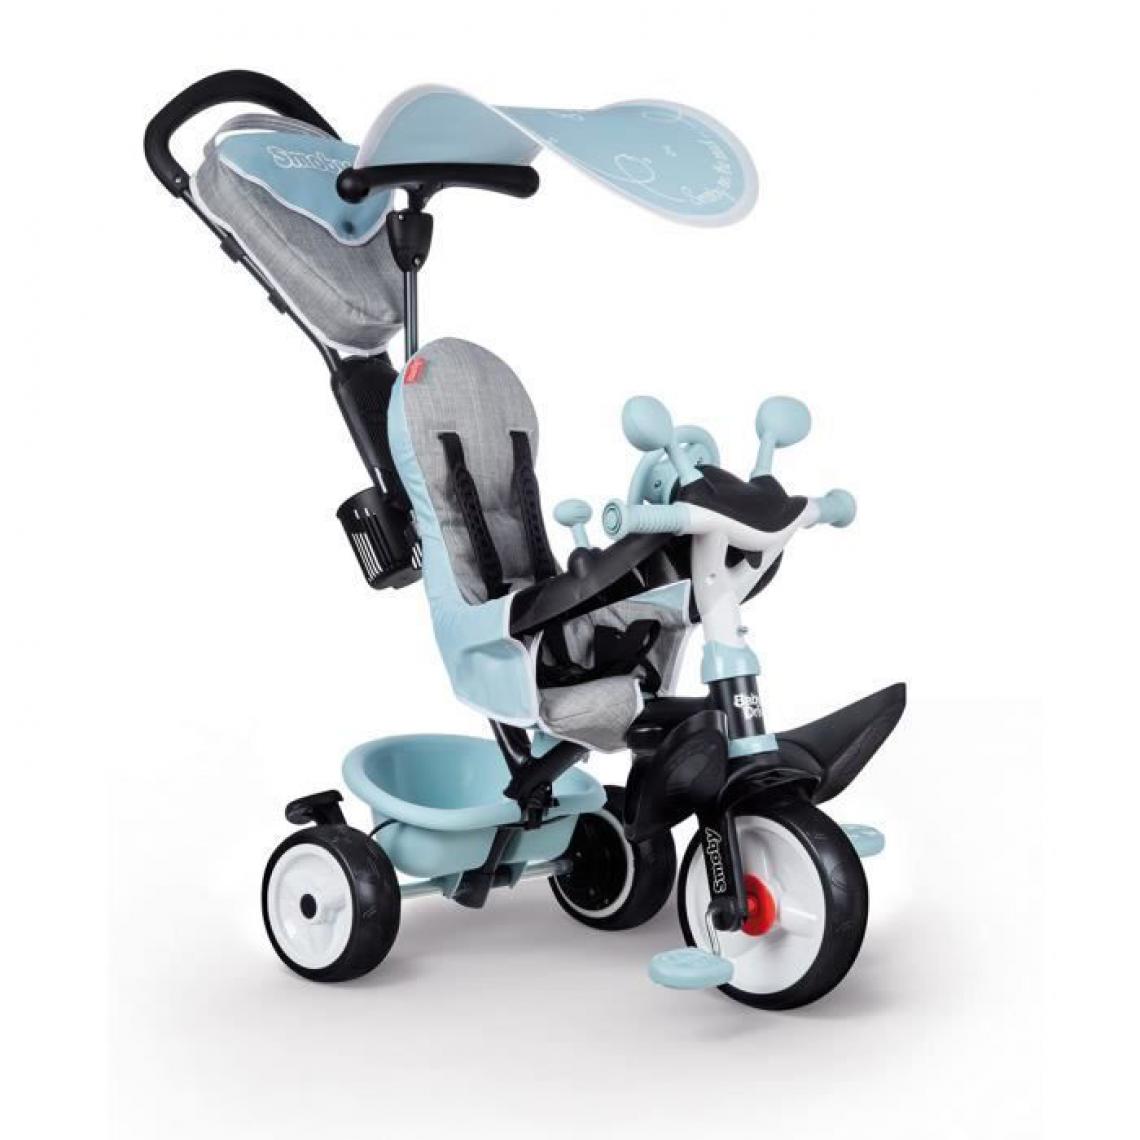 Smoby - Tricycle Baby Driver Plus Bleu - SMOBY - Tricycle